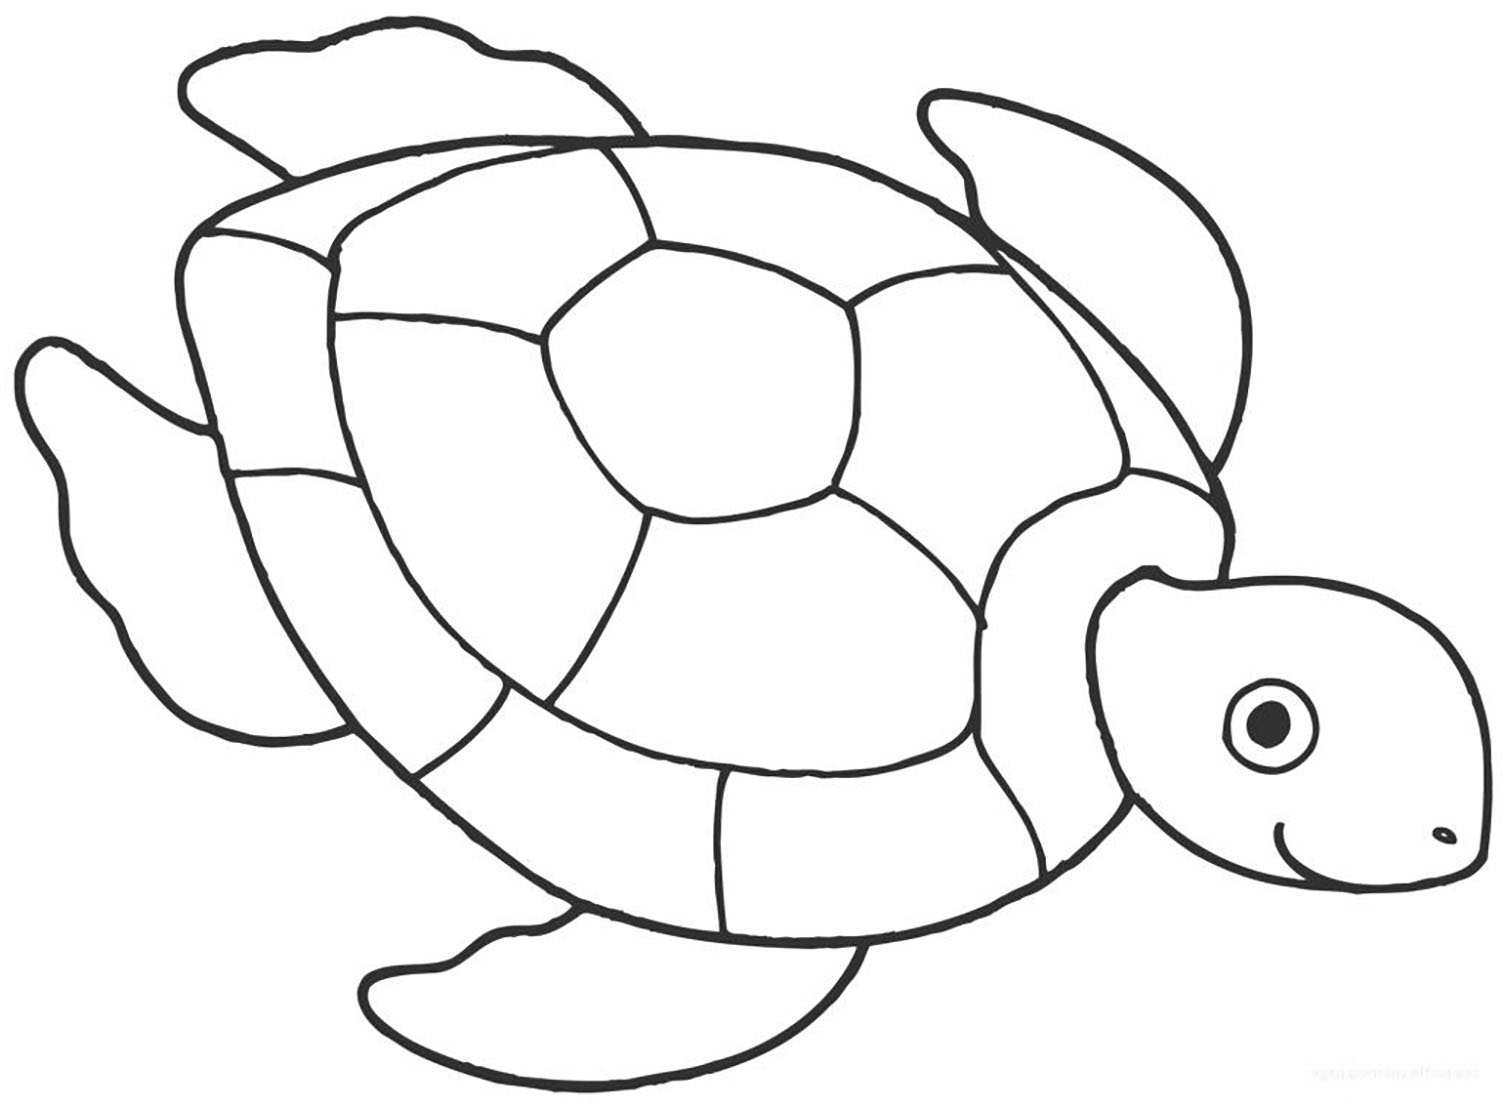 Turtles to color for kids Turtles Kids Coloring Pages